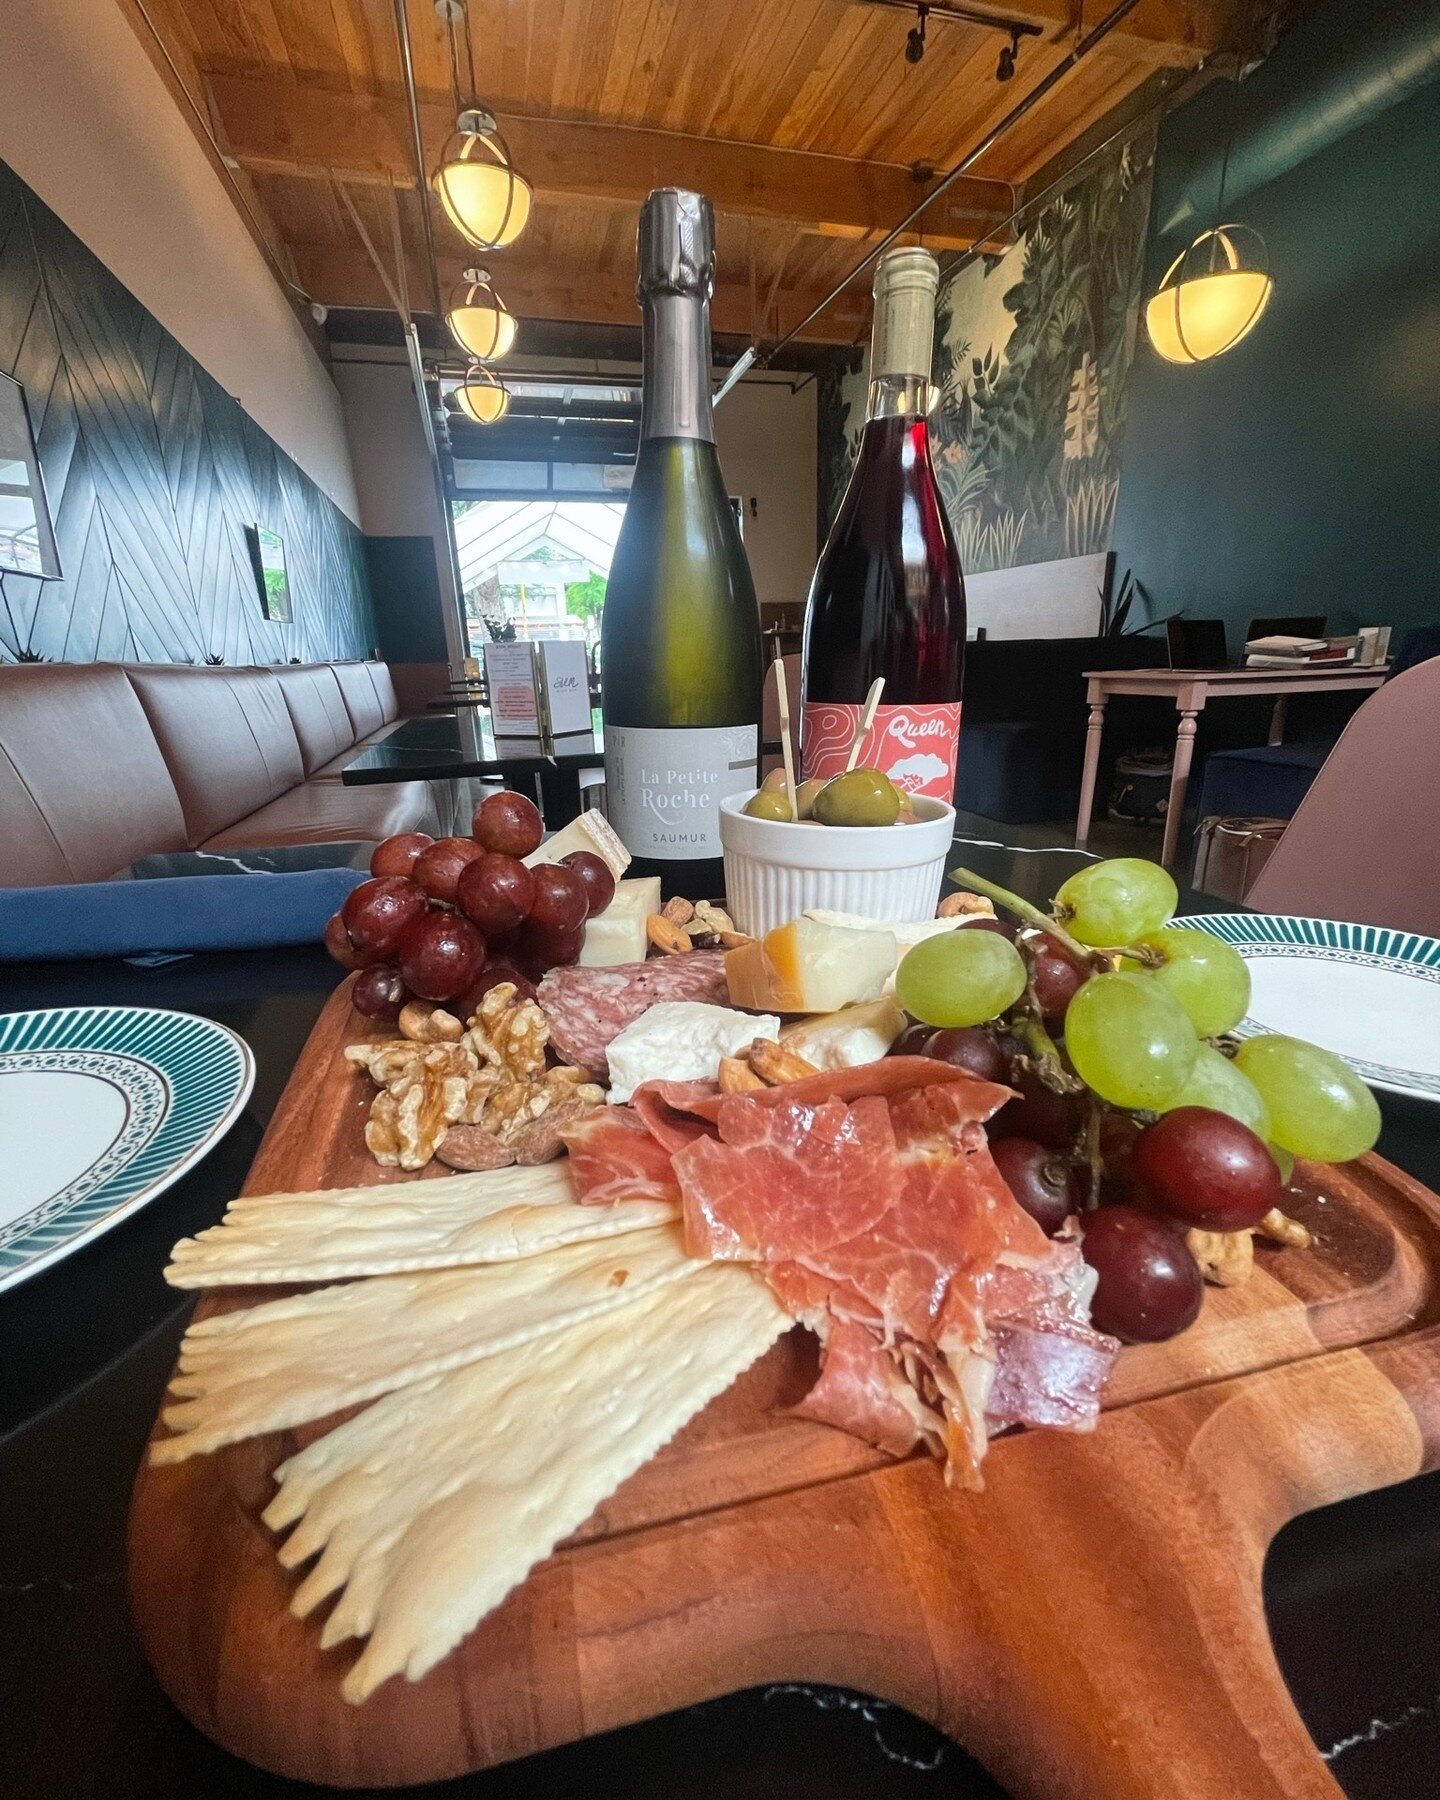 What could be better than wine, cheese, and live music? Adding charcuterie! 

Come and cool off at Stem with a glass of chilled wine, breezy music, and some tasty snacks!

Join us for a live performance by Julia Logue on Friday 7/29 from 7:00-9:00 pm